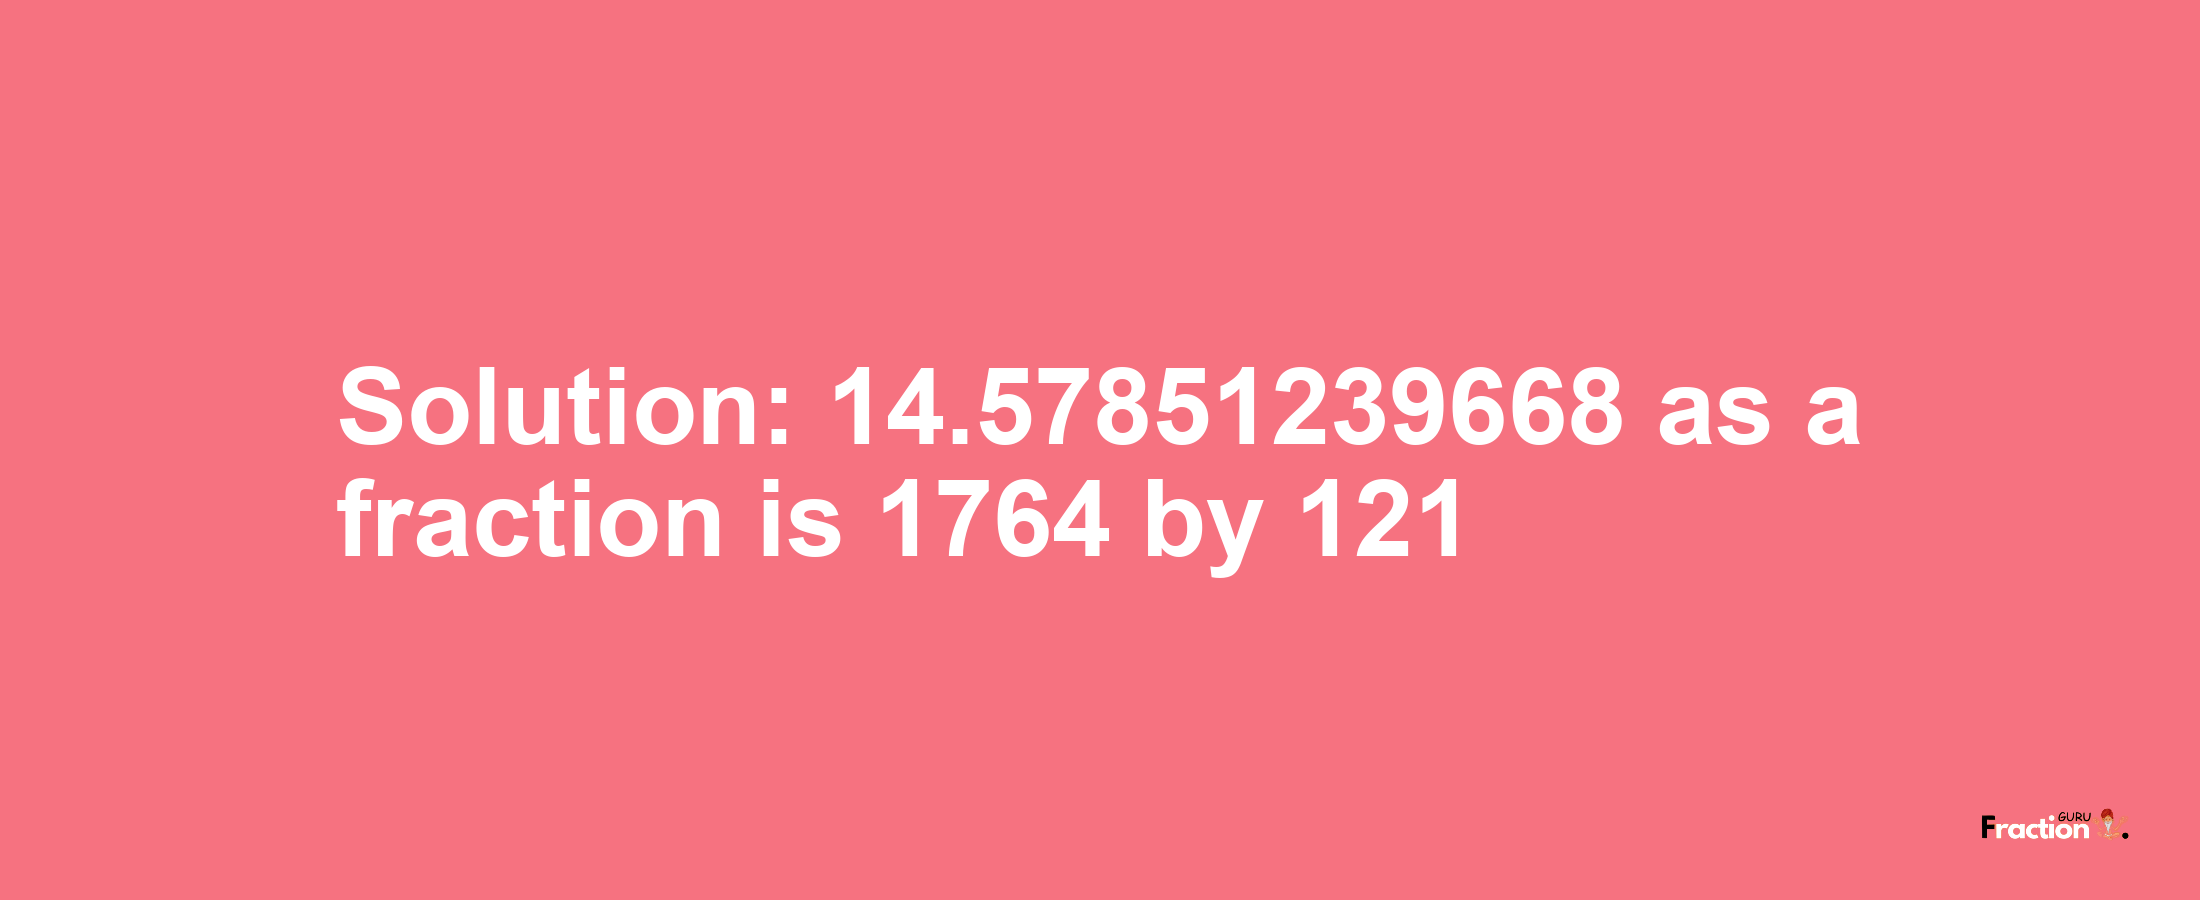 Solution:14.57851239668 as a fraction is 1764/121